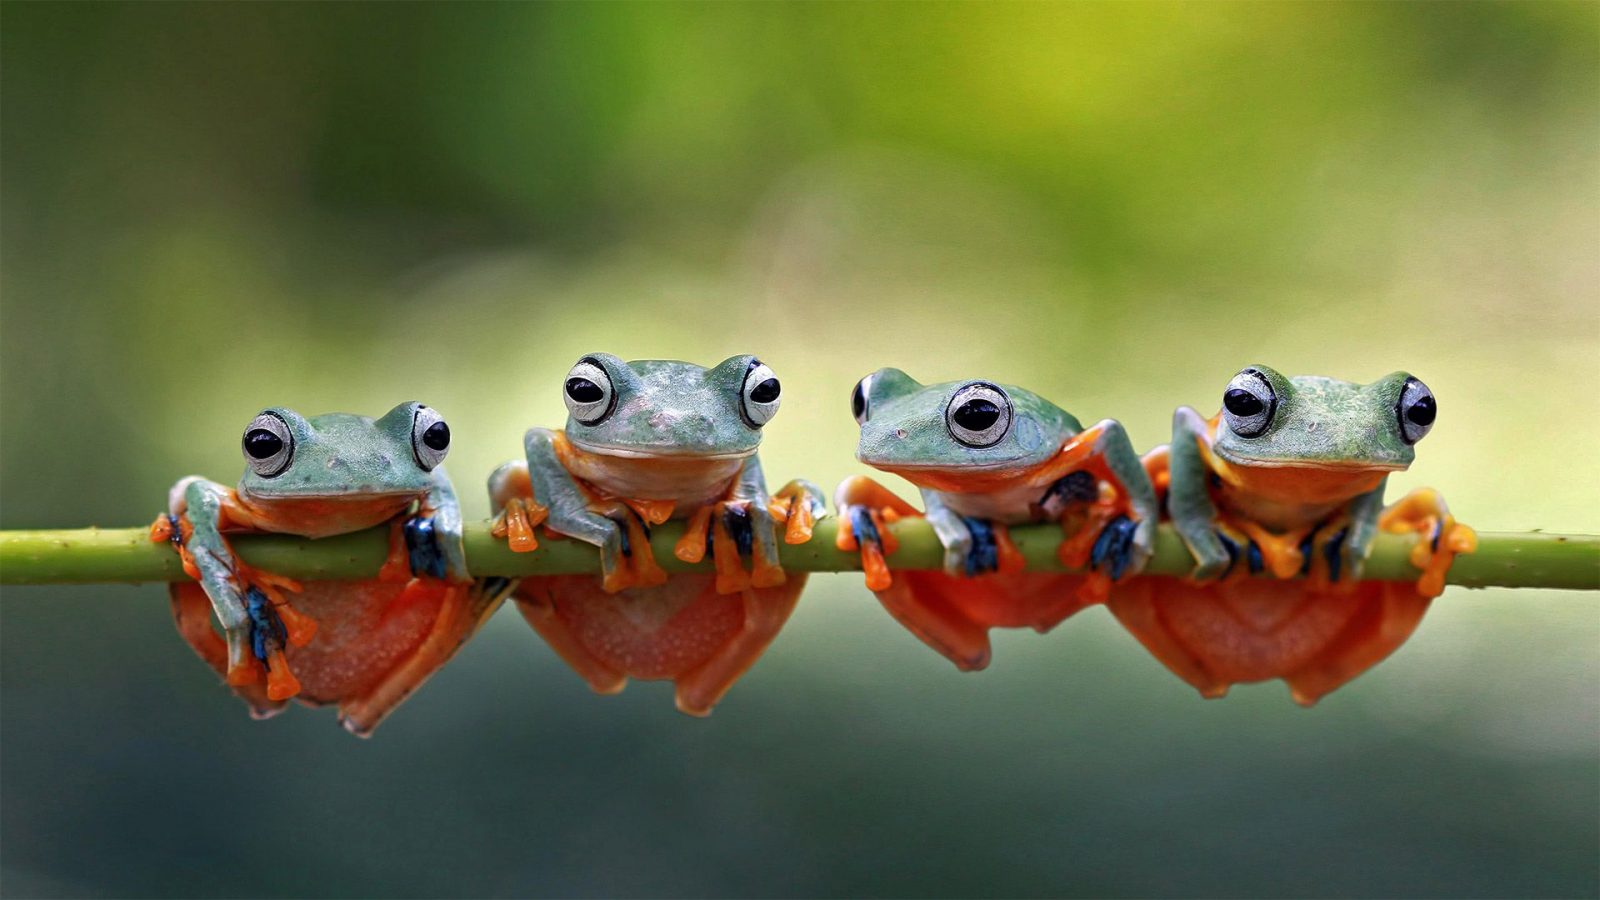 It's OK If You Don't Know Much About Animals. Take This Quiz to Learn Something New Javan tree frogs amphibians